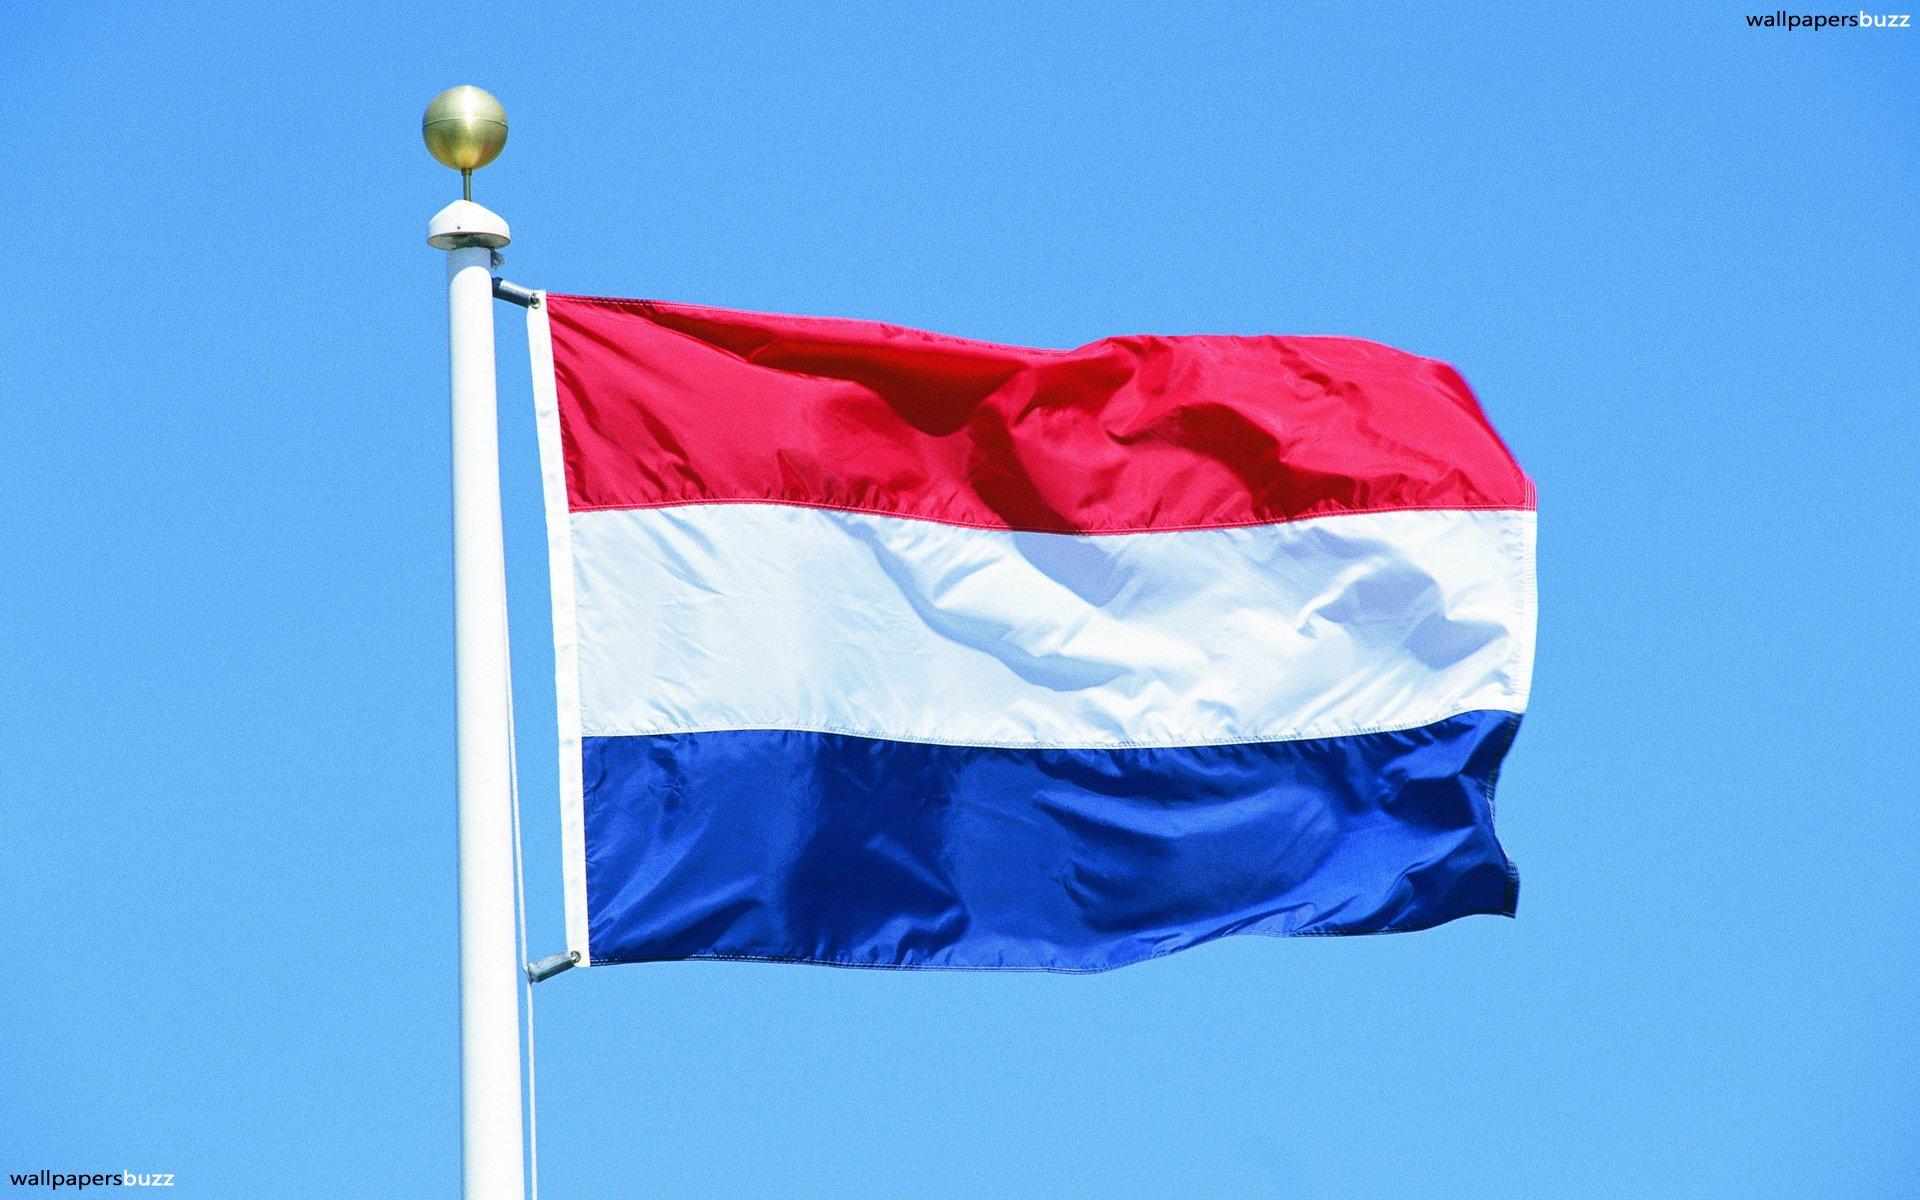 The traditional flag of Kingdom of Netherlands HD Wallpaper